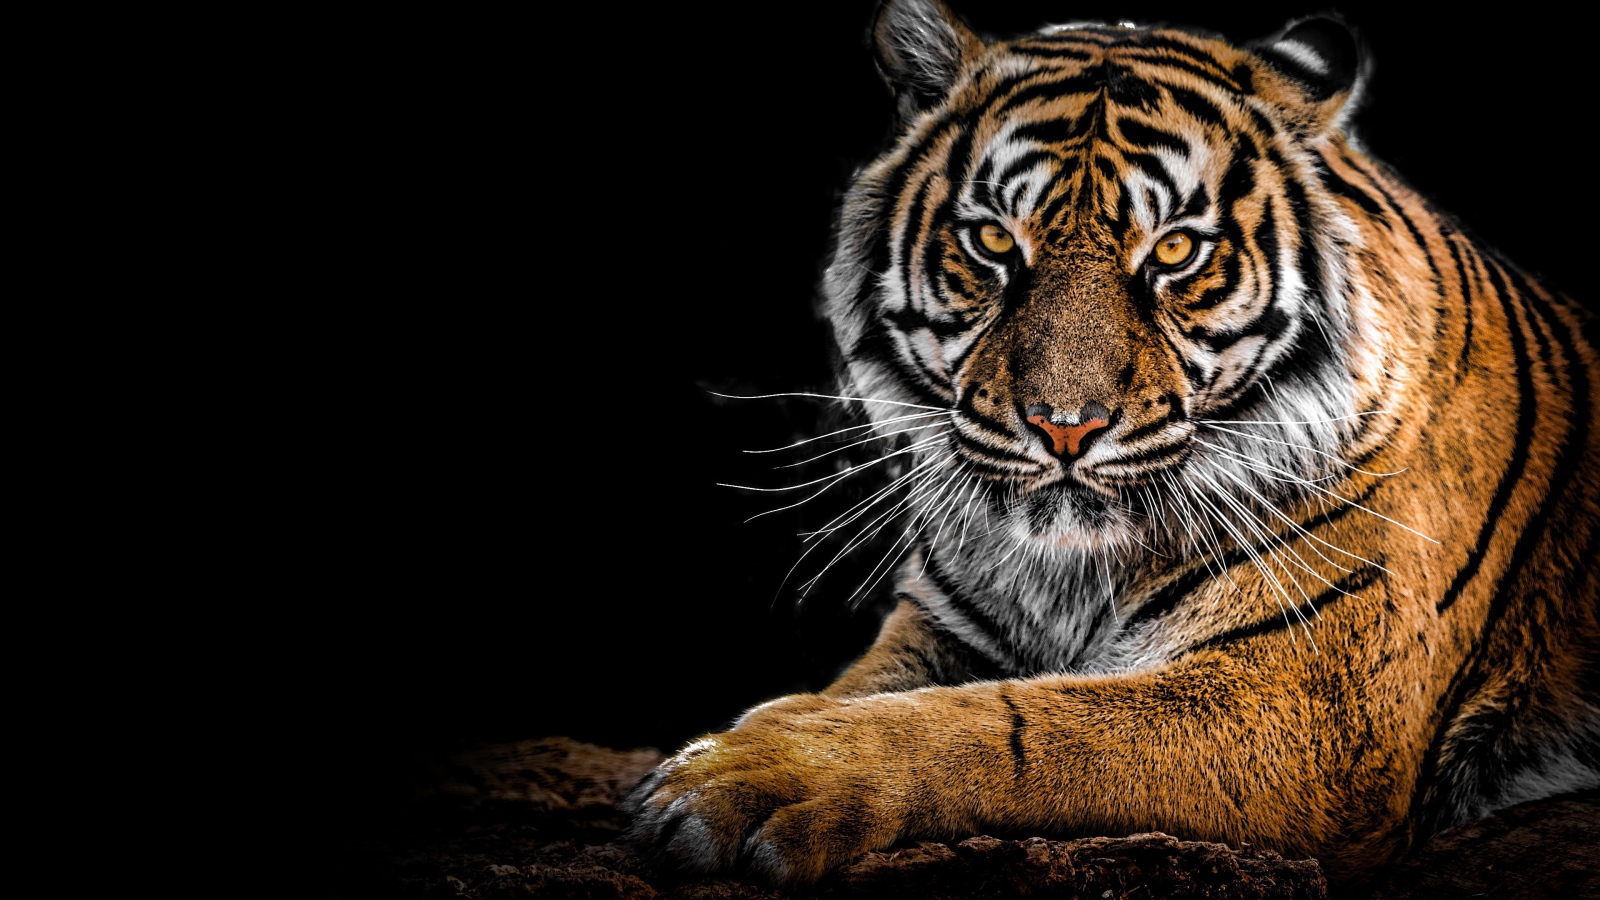 The harsh striped tiger lies on a black background Desktop wallpapers  1600x900